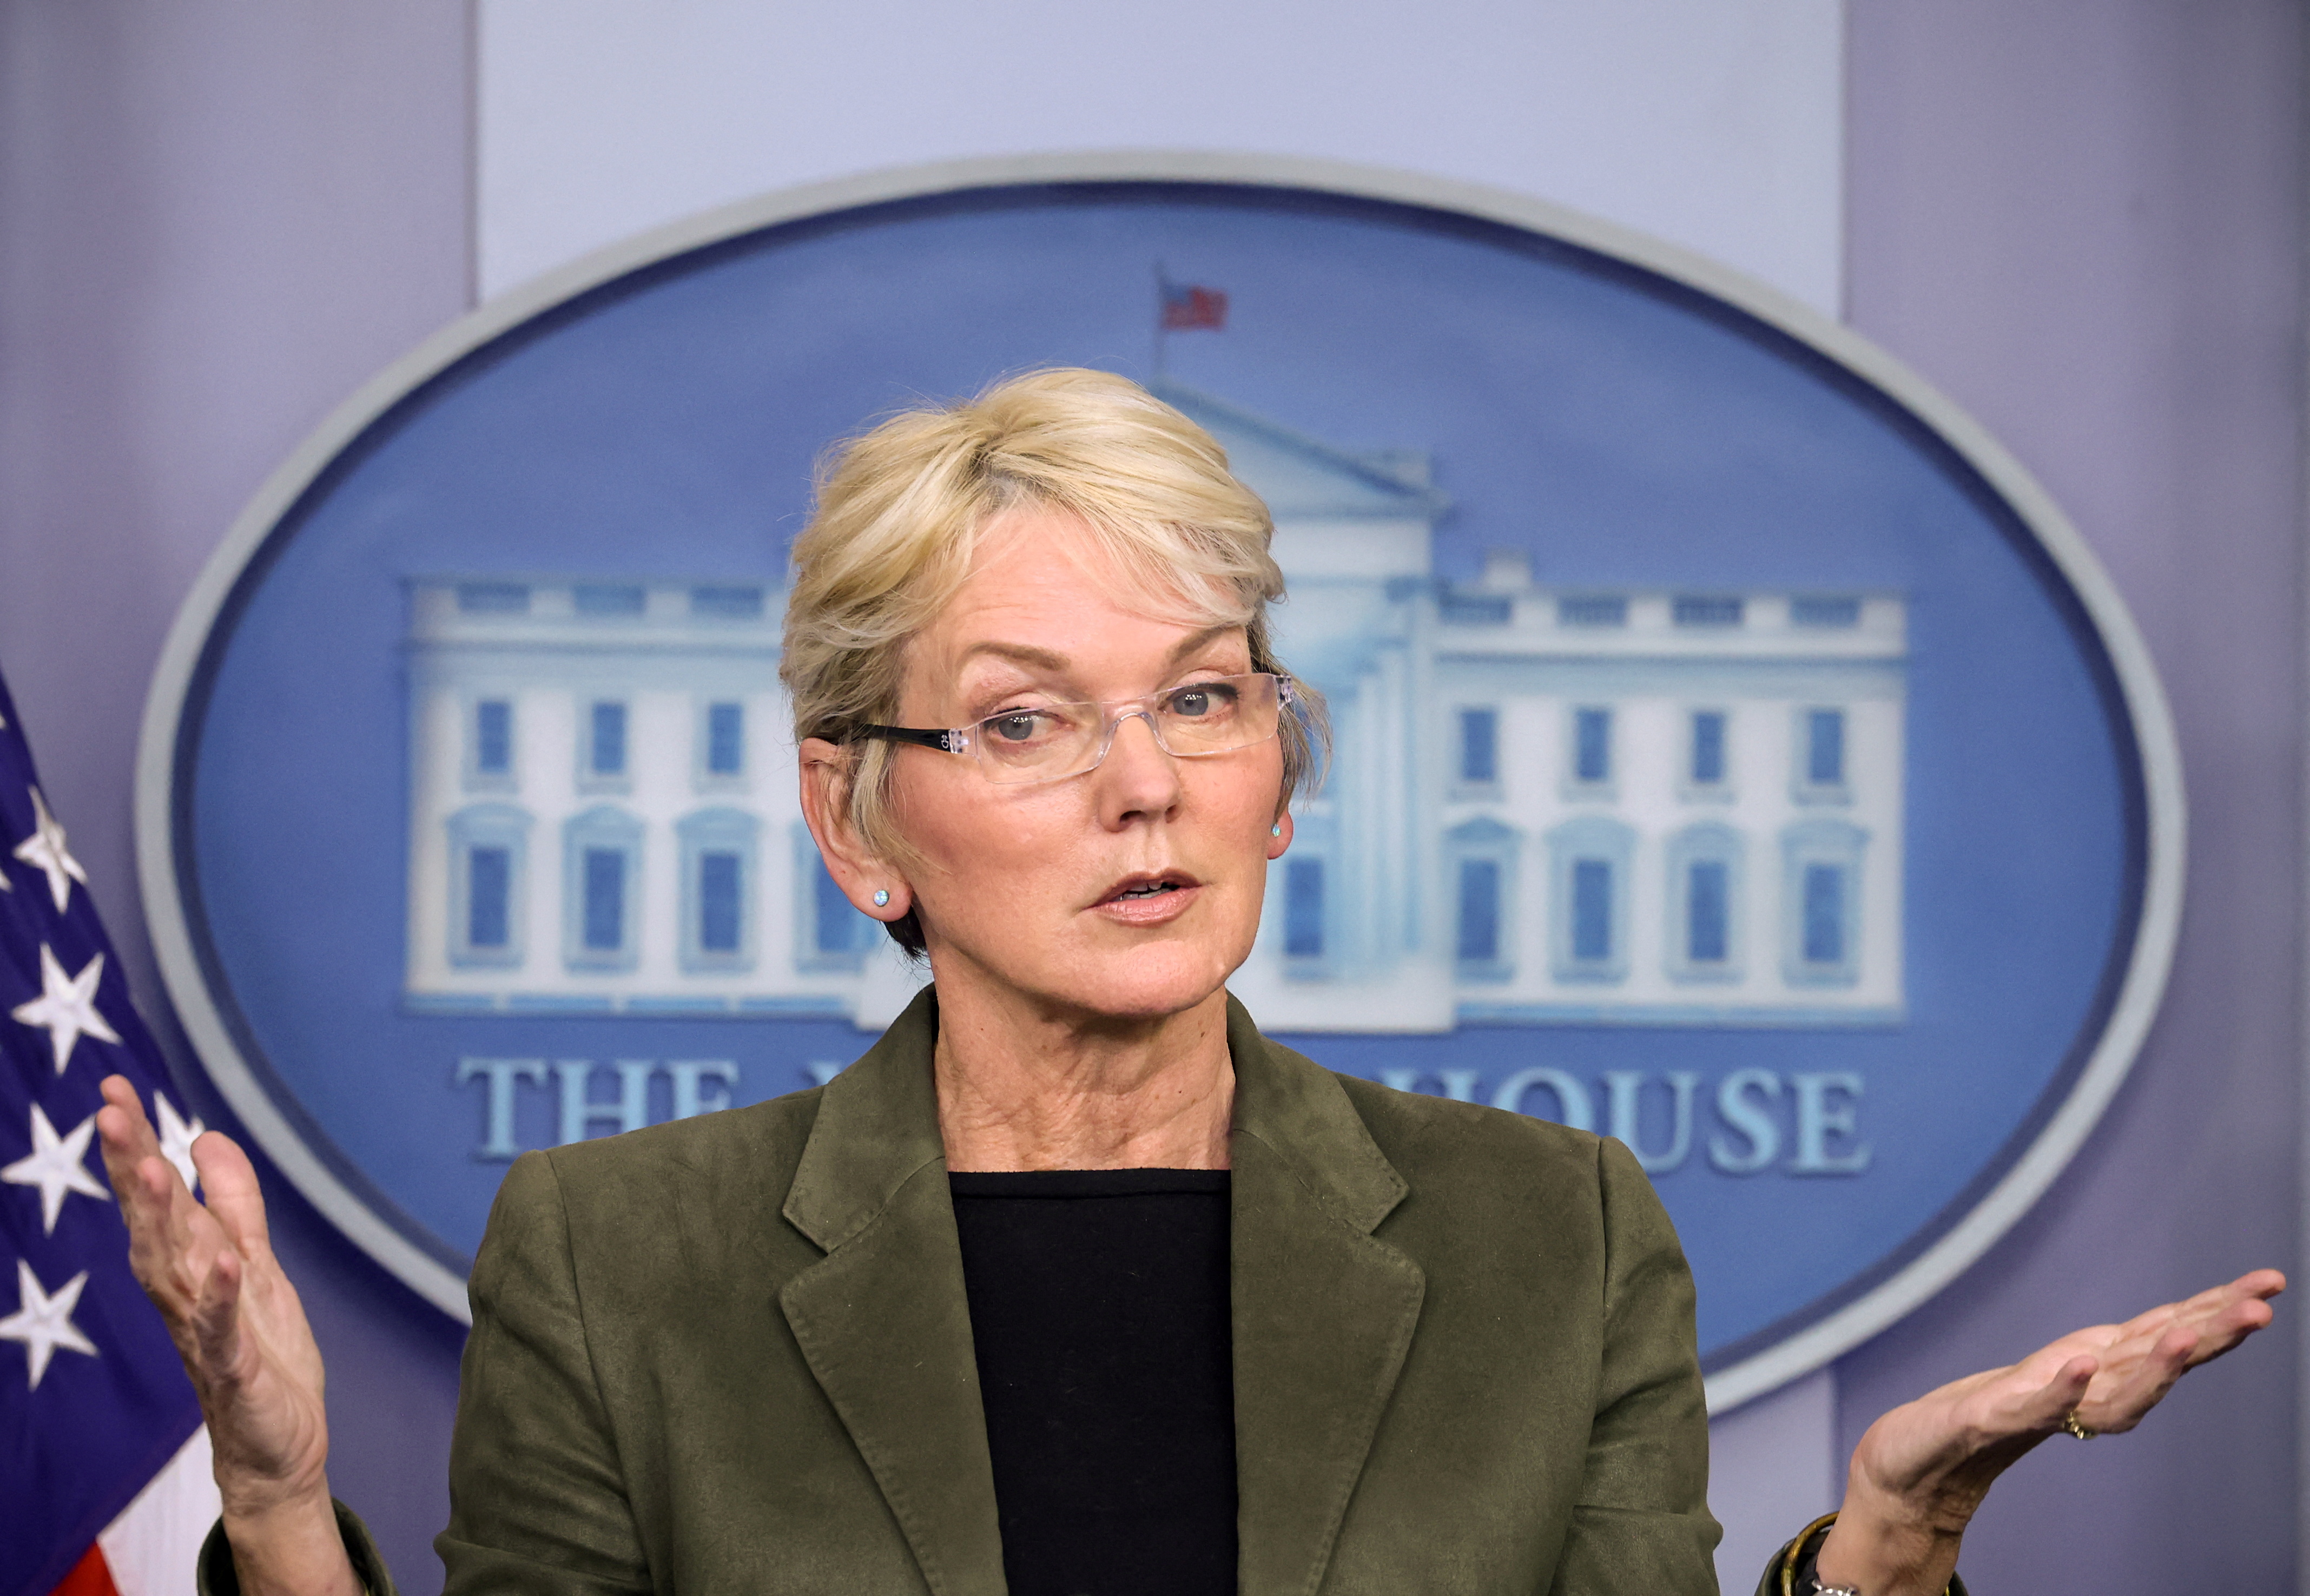 Secretary of Energy Jennifer Granholm takes questions during a media briefing at the White House in Washington, U.S., November 23, 2021. REUTERS/Evelyn Hockstein